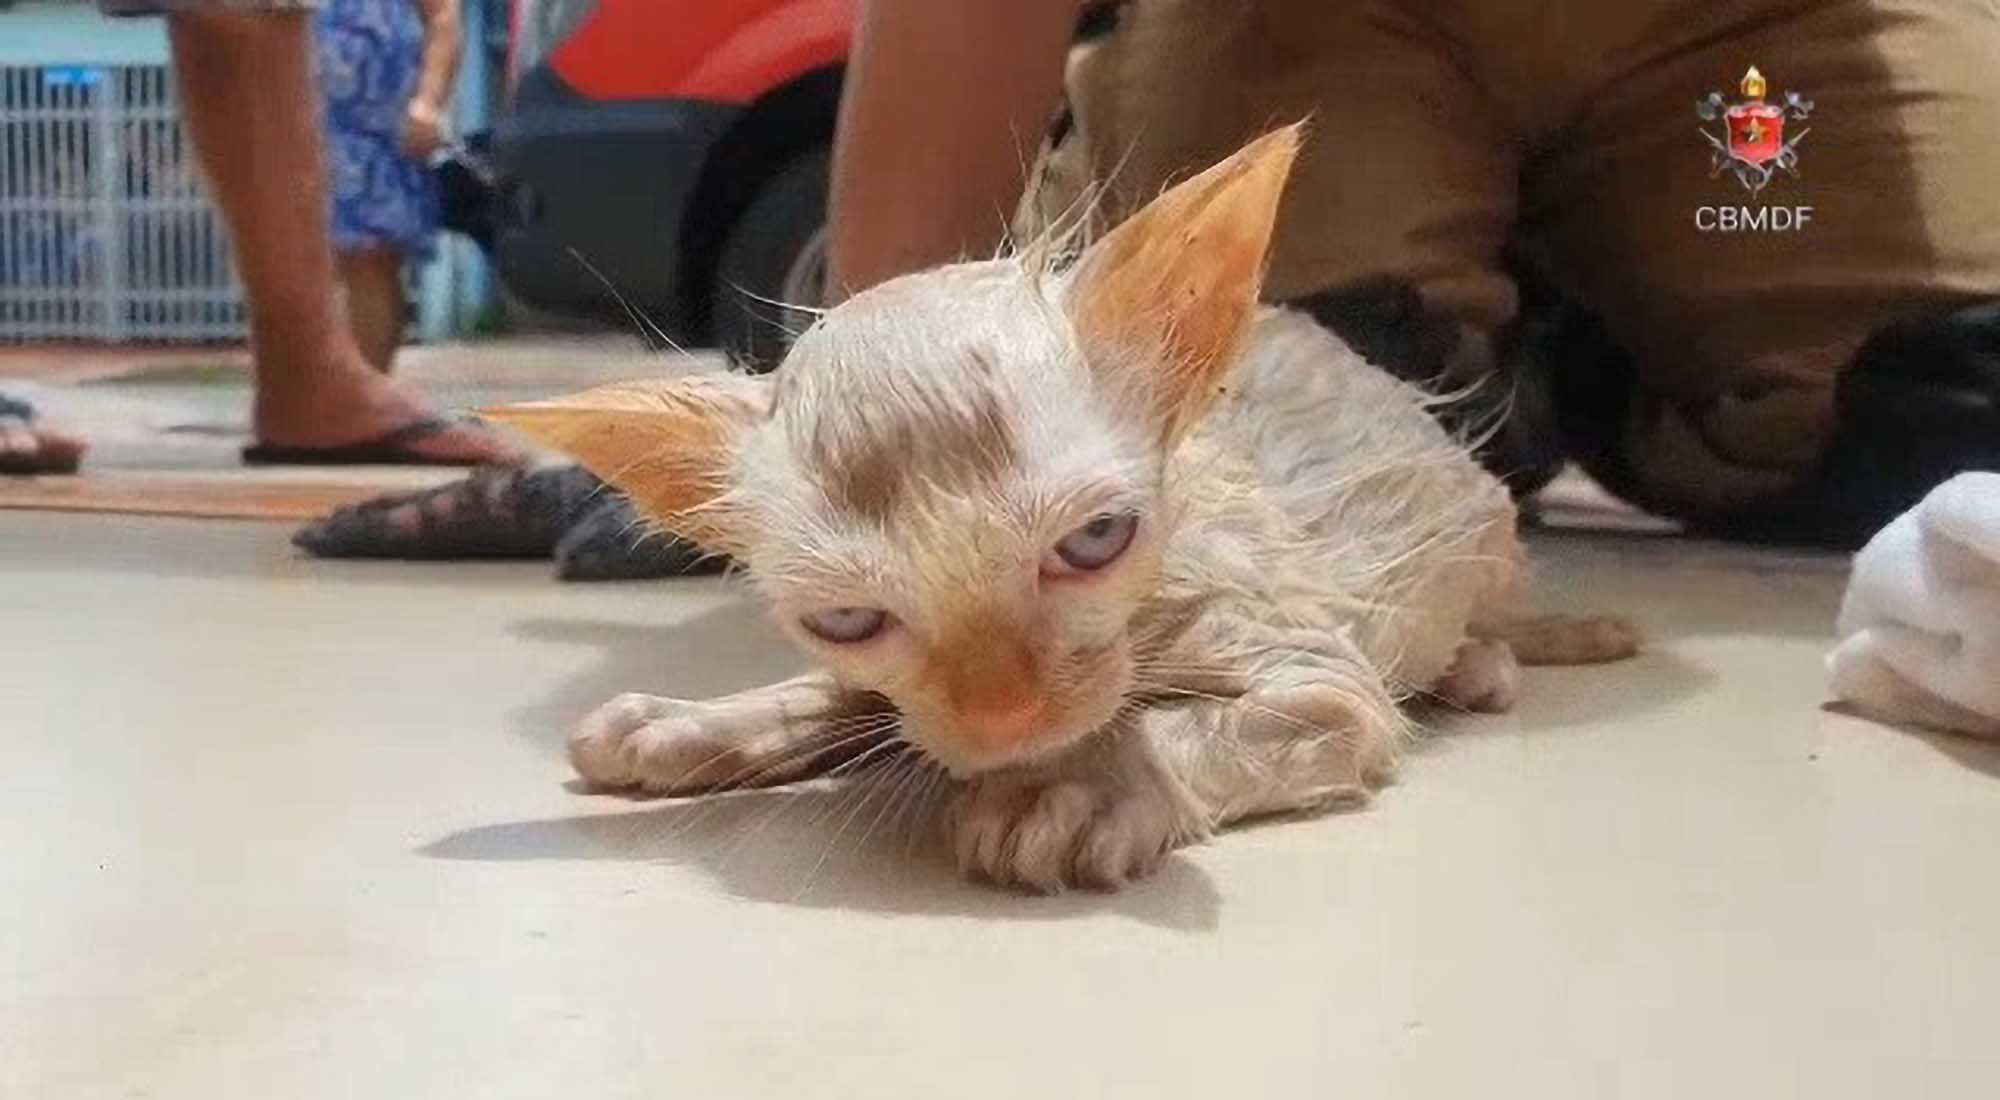 Firefighters Save Dying Kitten With Mouth-To-Mouth